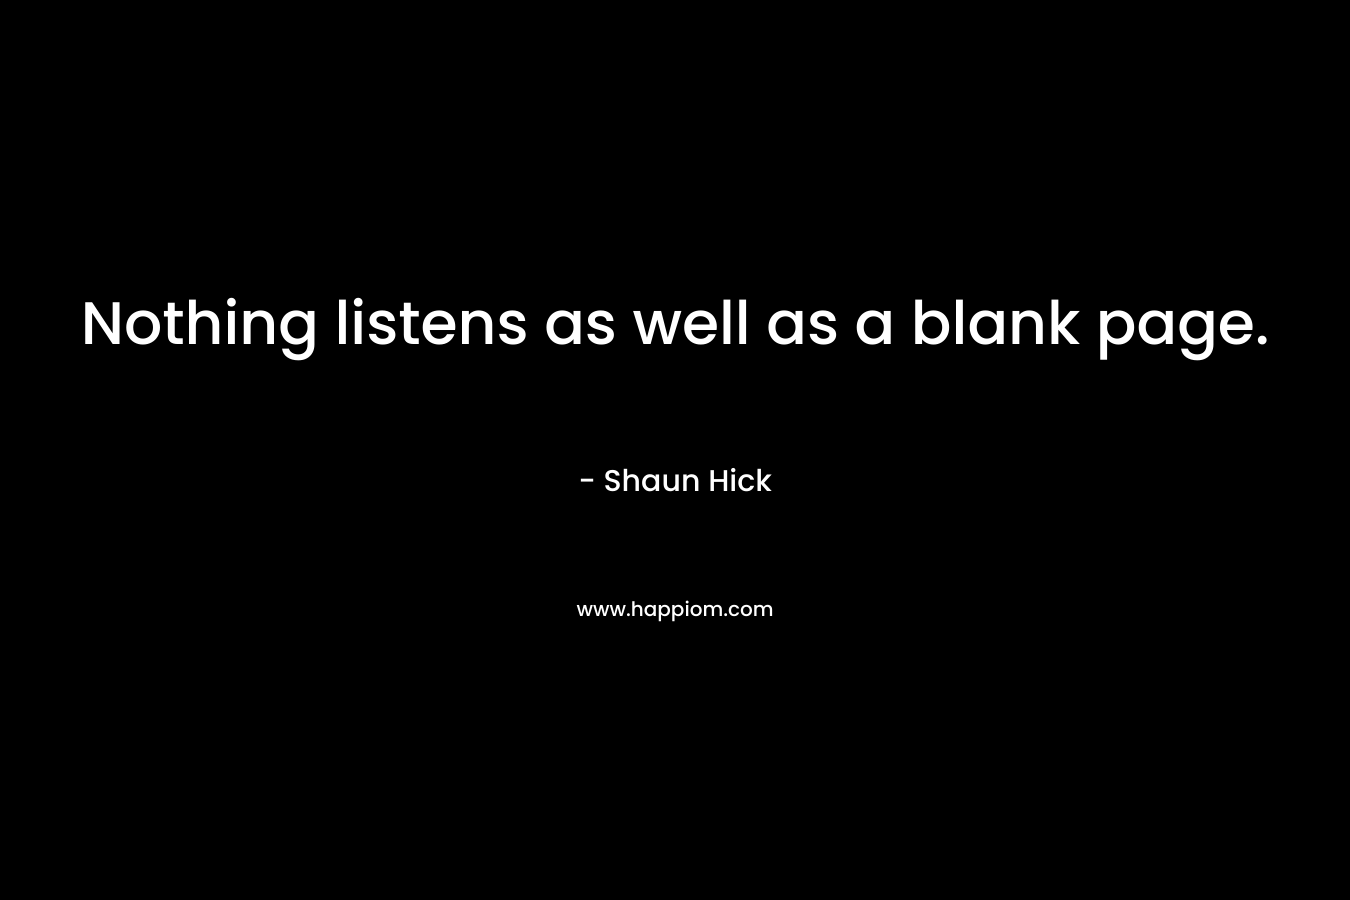 Nothing listens as well as a blank page. – Shaun Hick